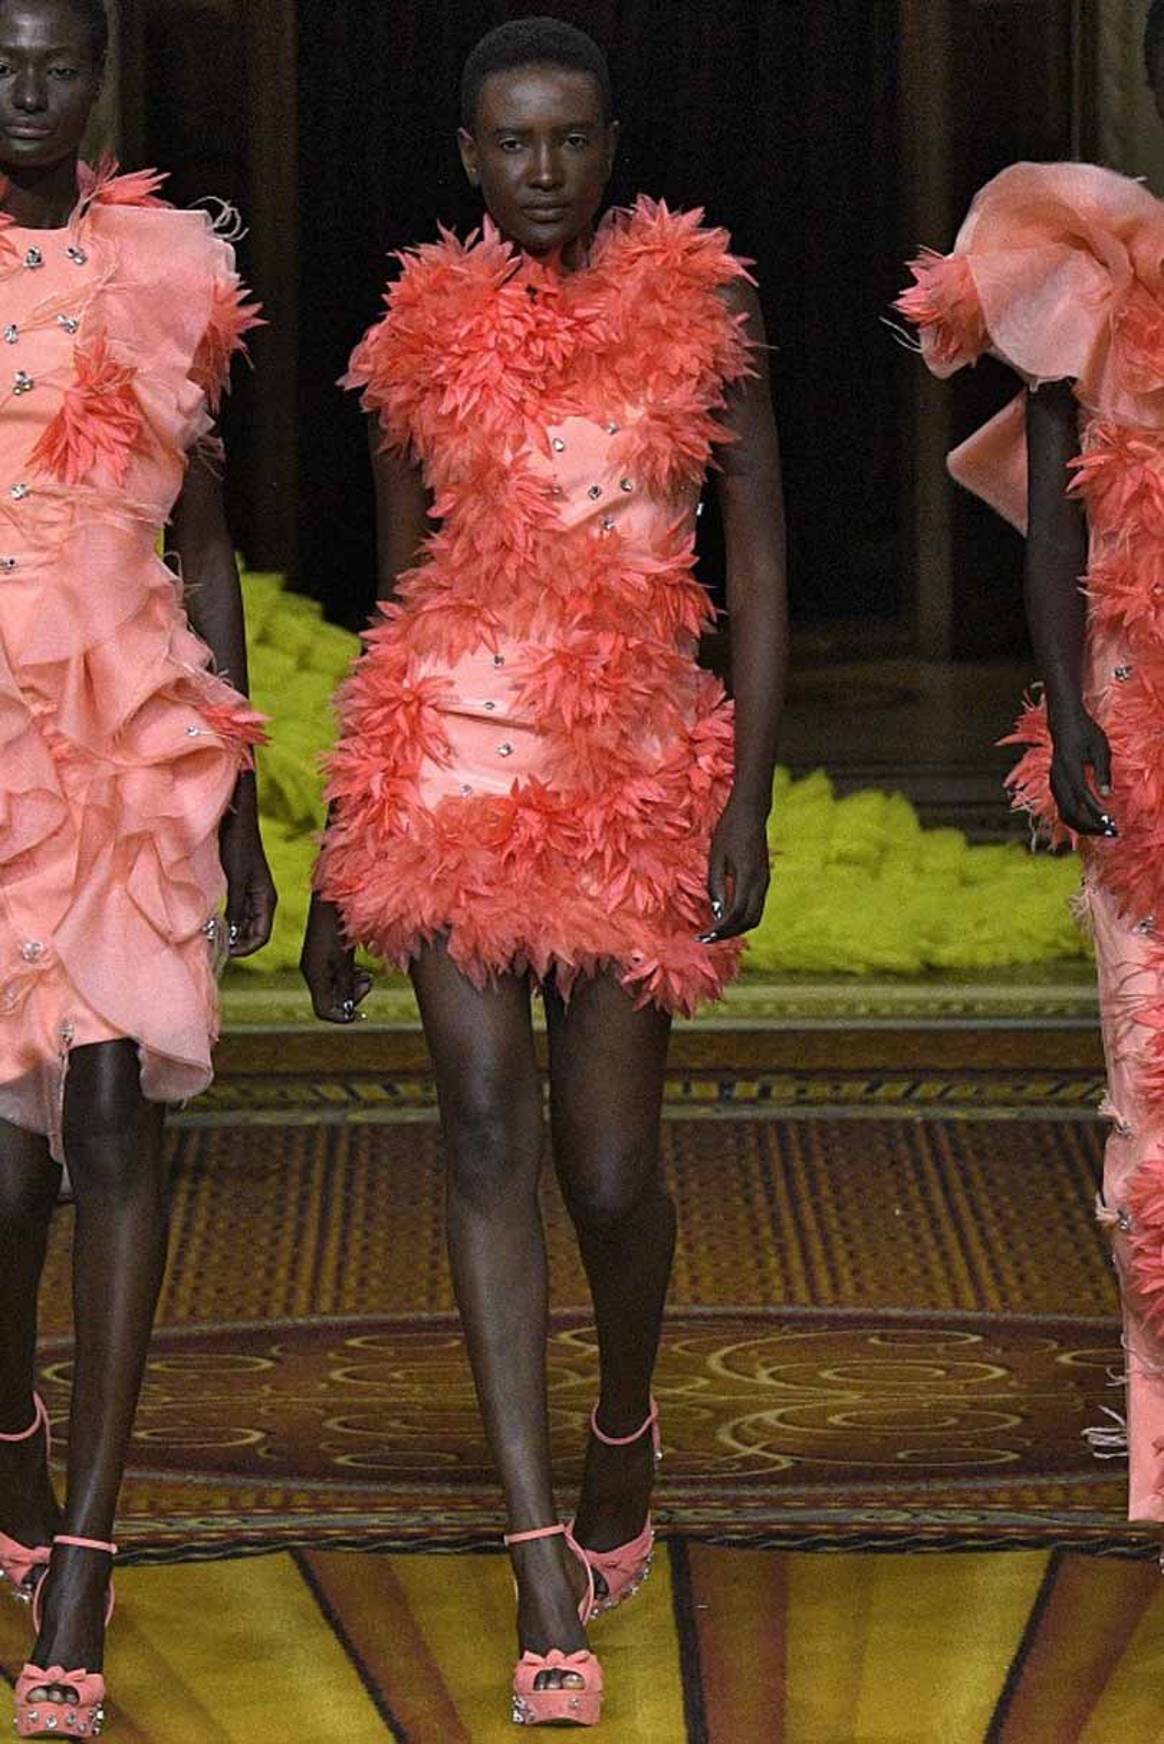 Spotted on the runway: Colour of the year 2019, Living Coral